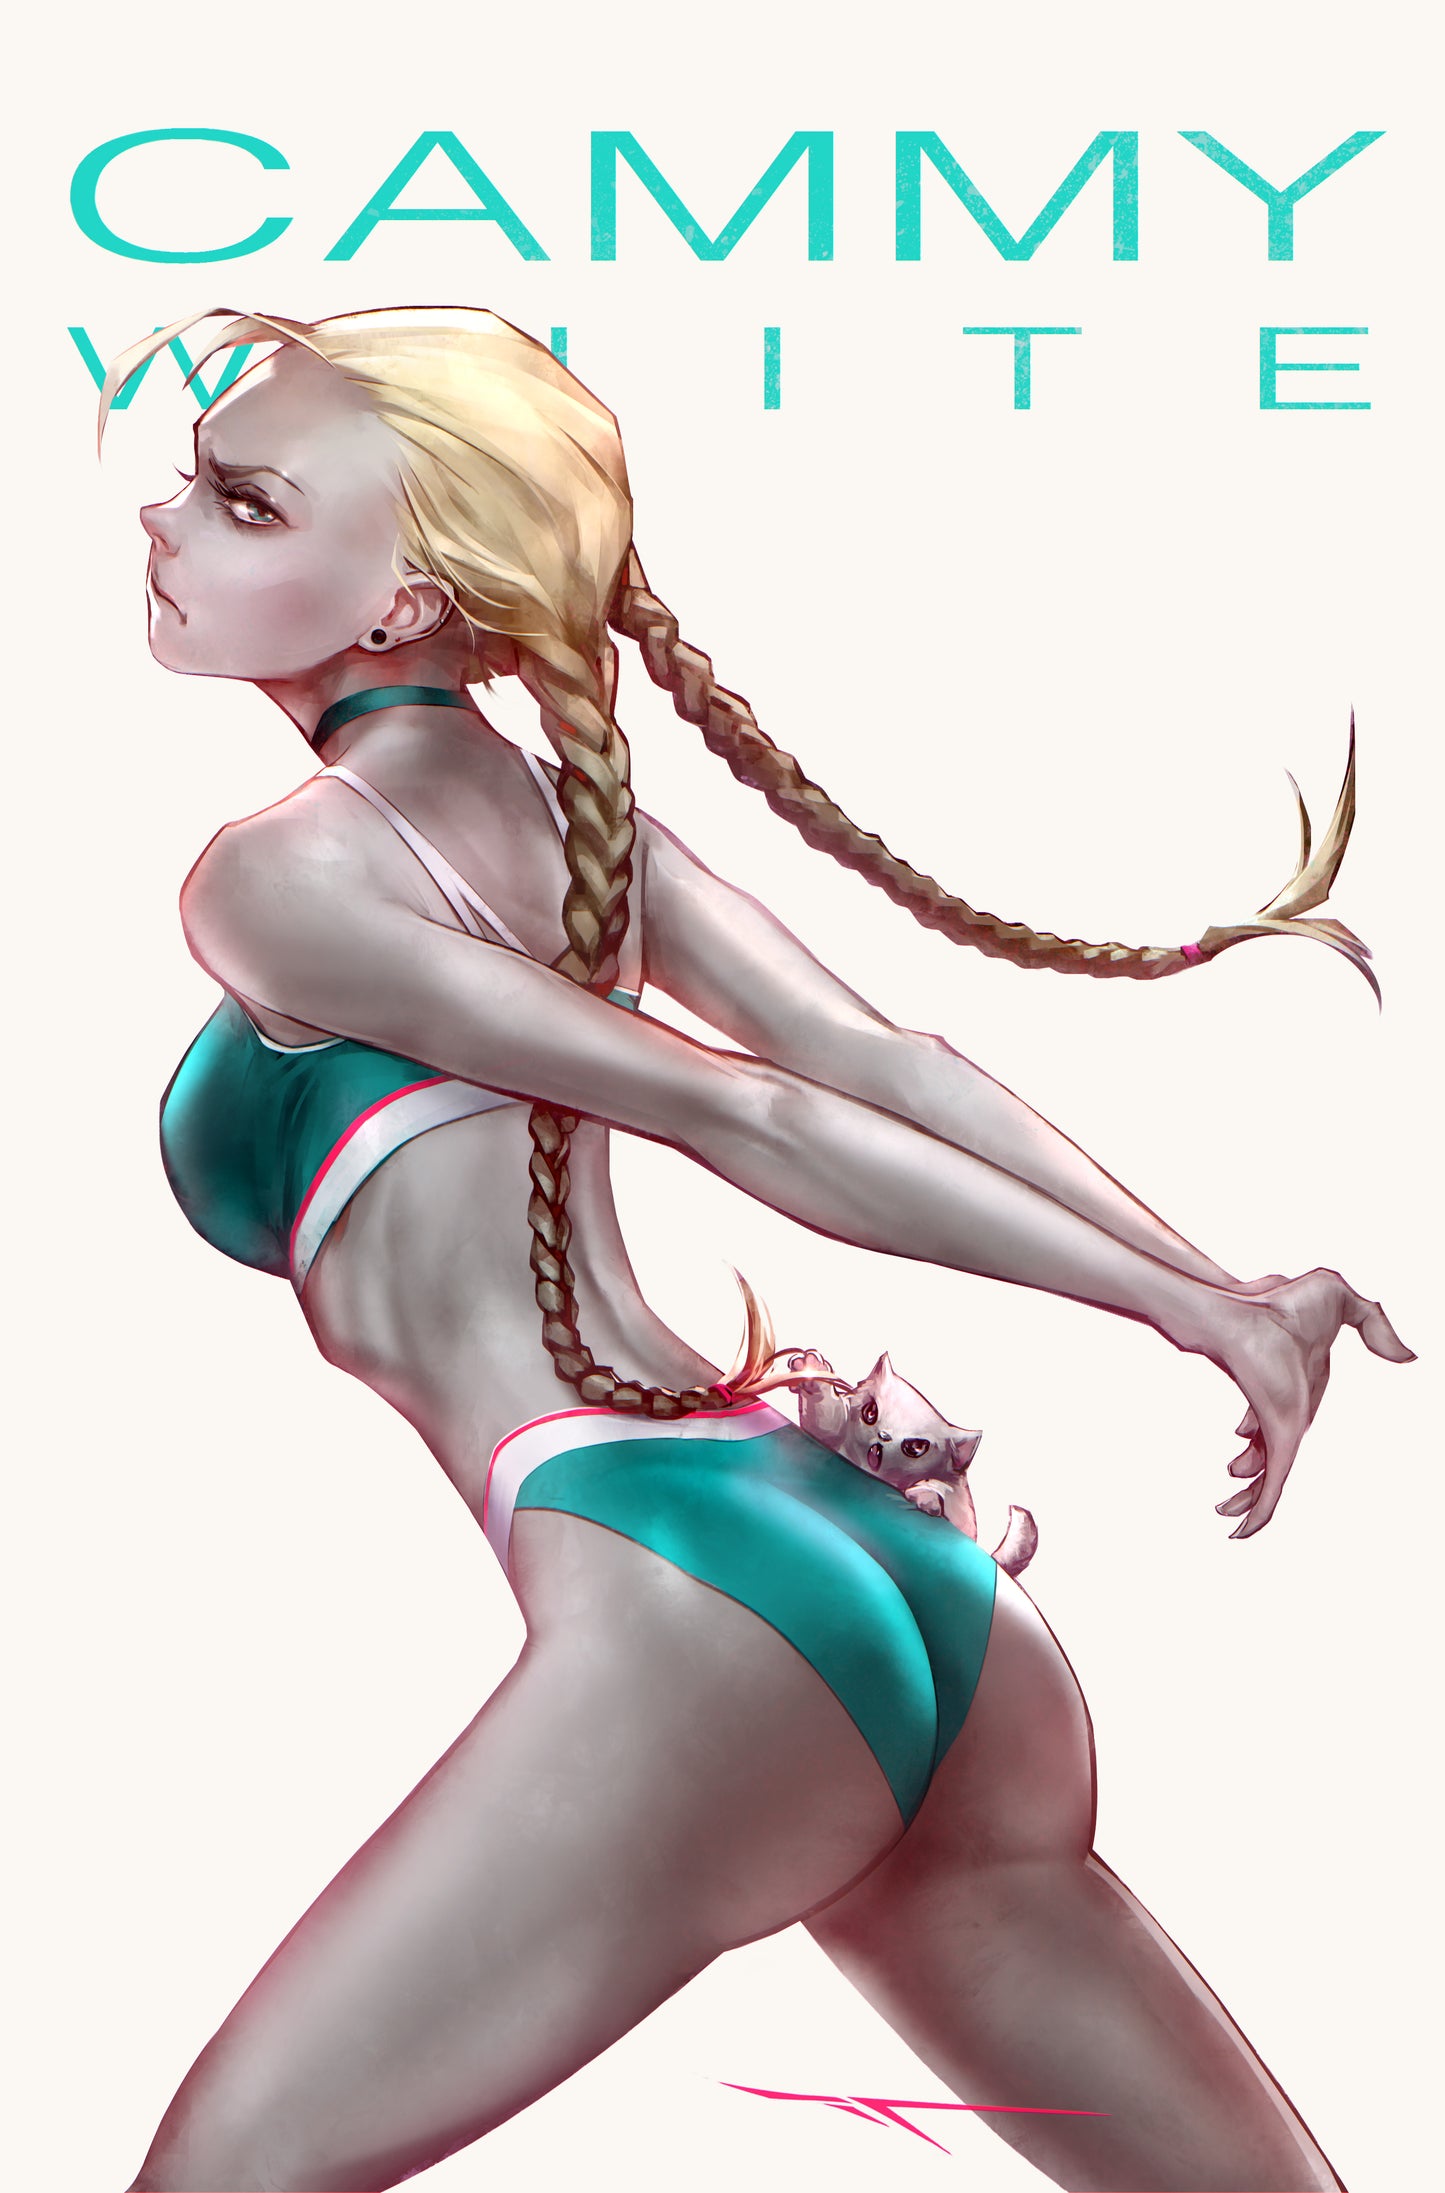 STREET FIGHTER SWIMSUIT SPECIAL 2022 IVAN TAO CAMMY VARIANT LIMITED TO 500